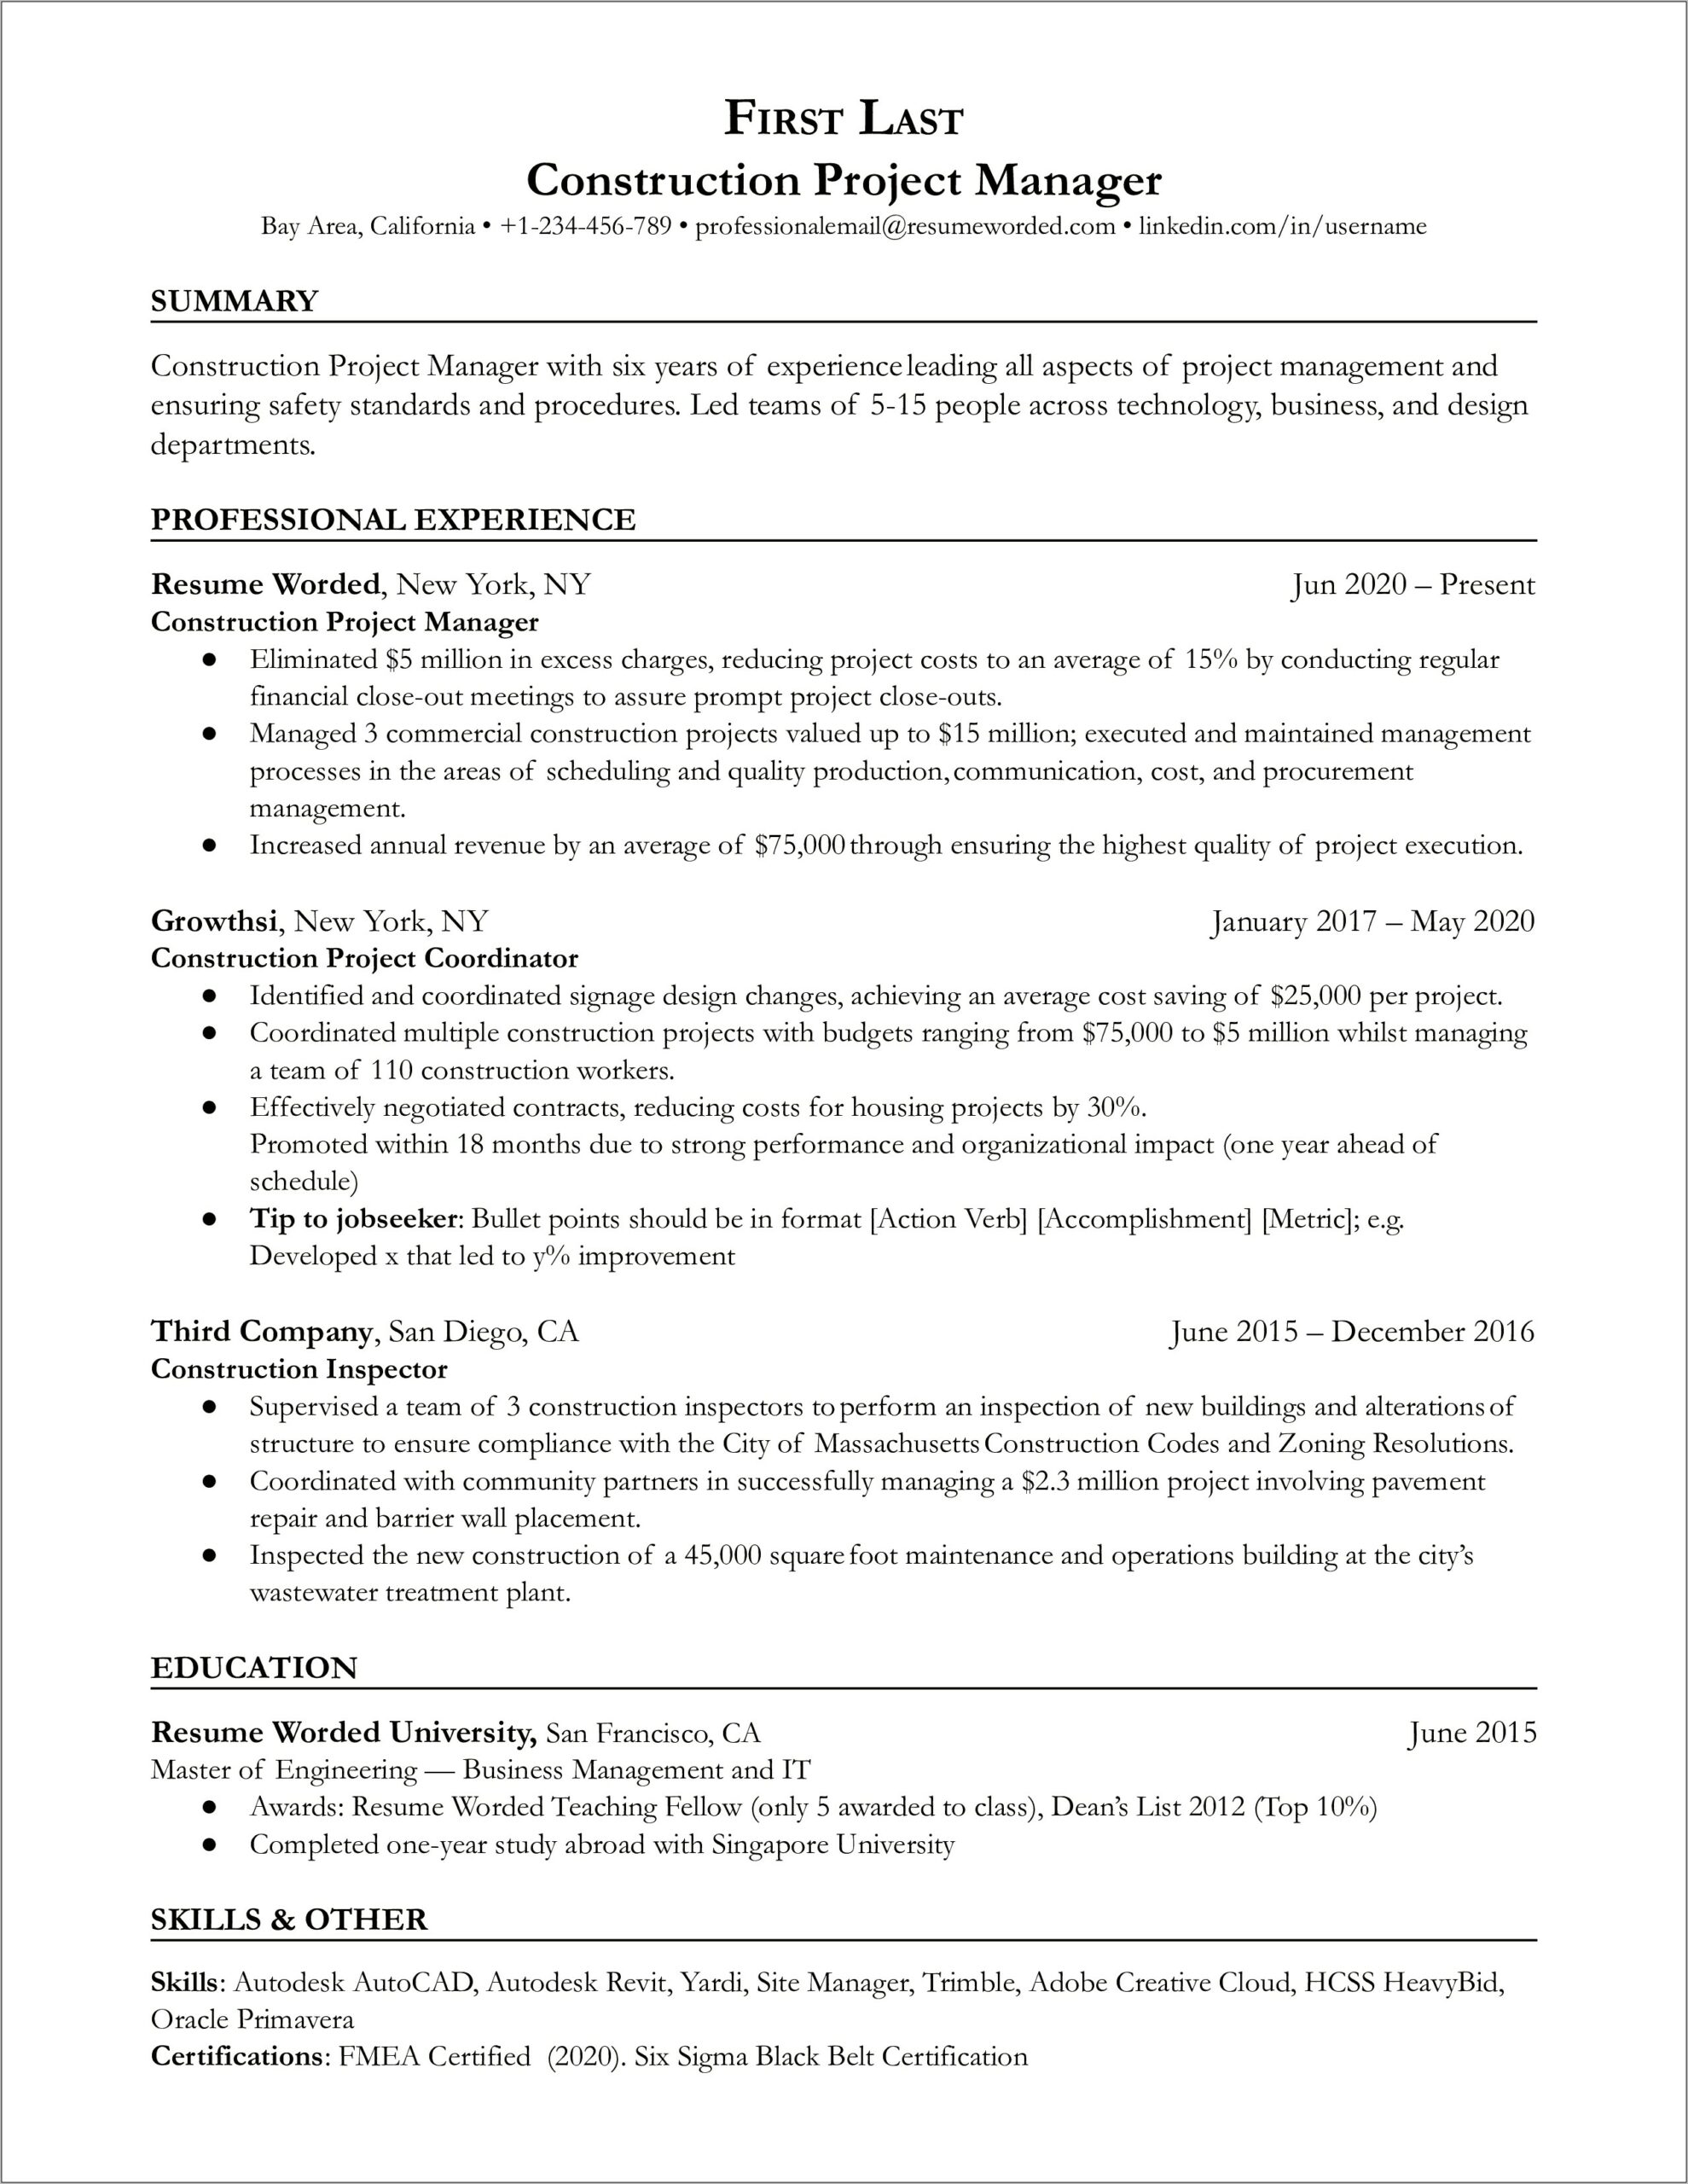 Project Management Information To List On Resume